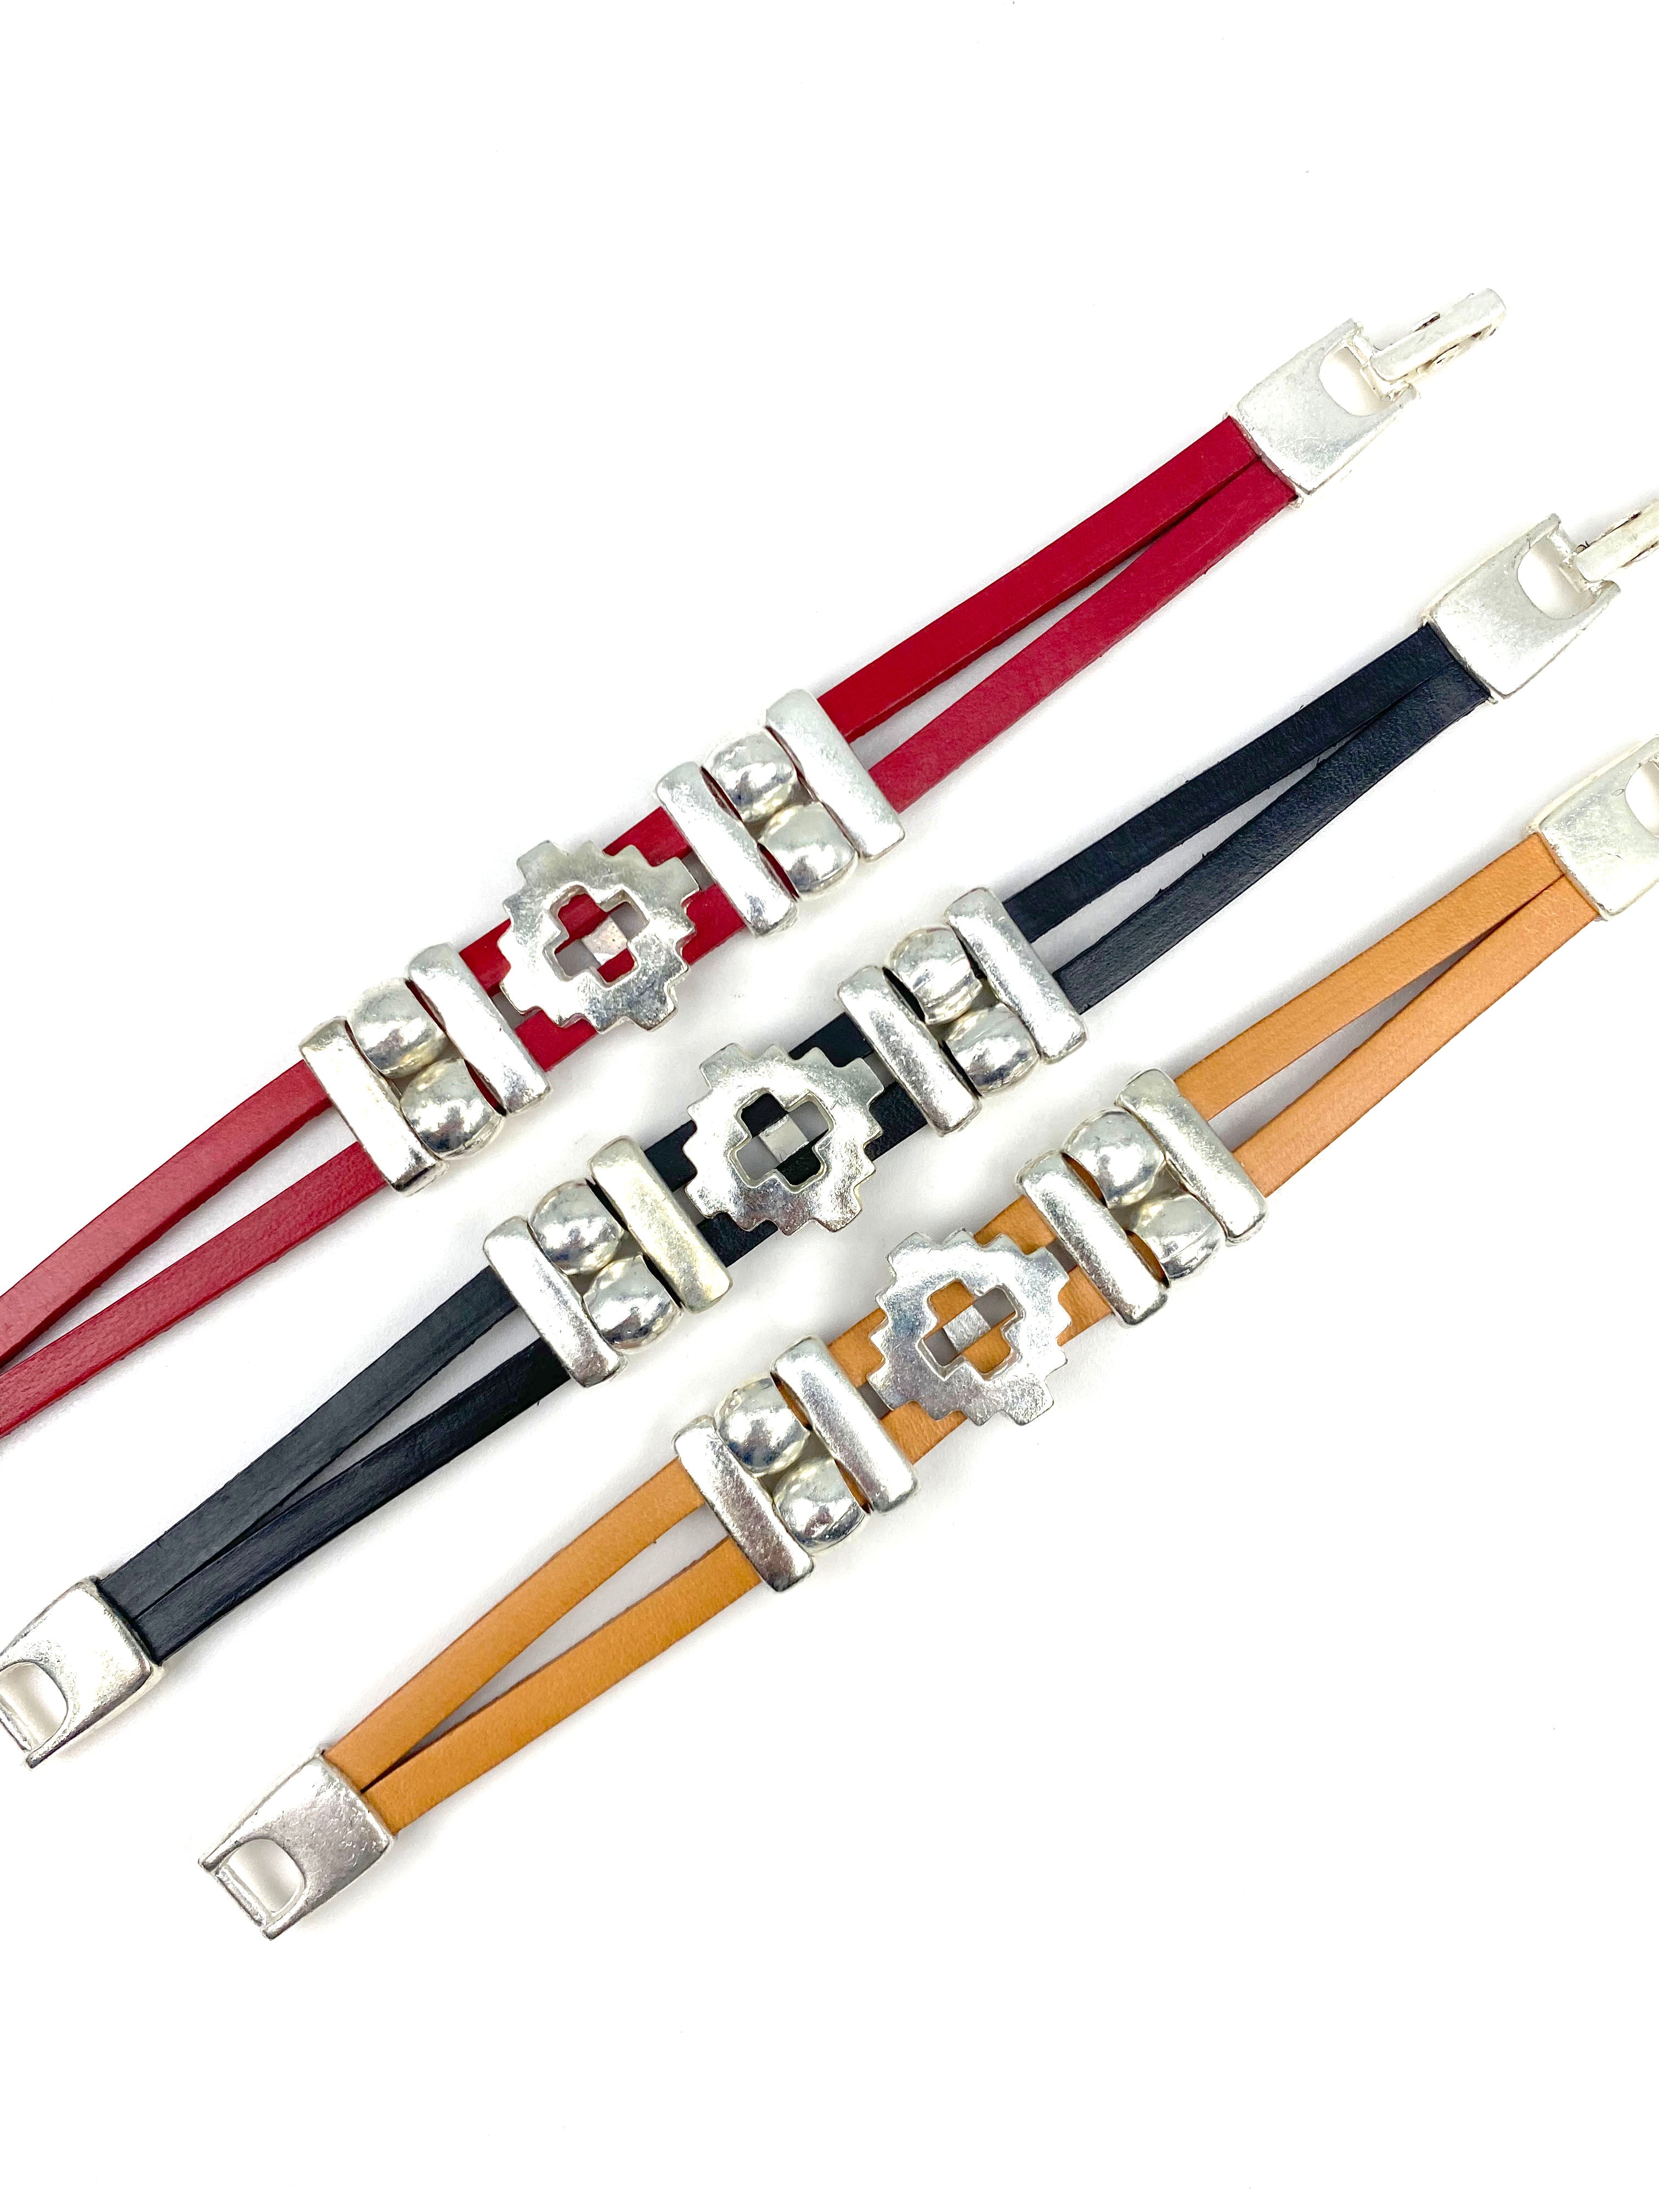 Vintage Cross bracelet handmade jewelry with Genuine Double Leather Straps by Graciela's Collection